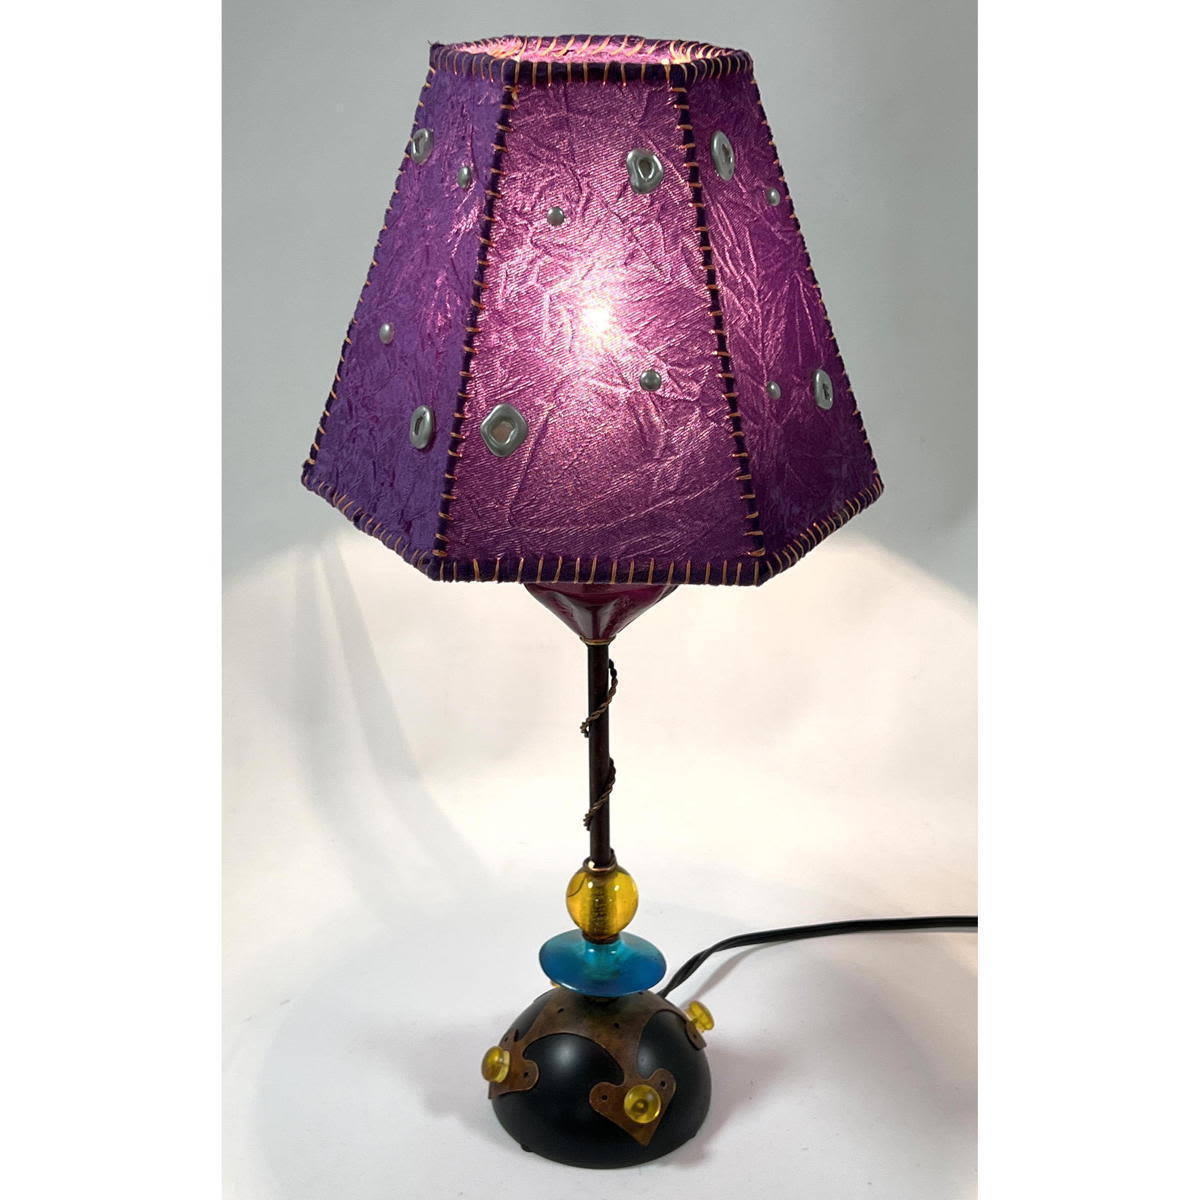 Artisan Hand Crafted Fantasy Table Lamp.